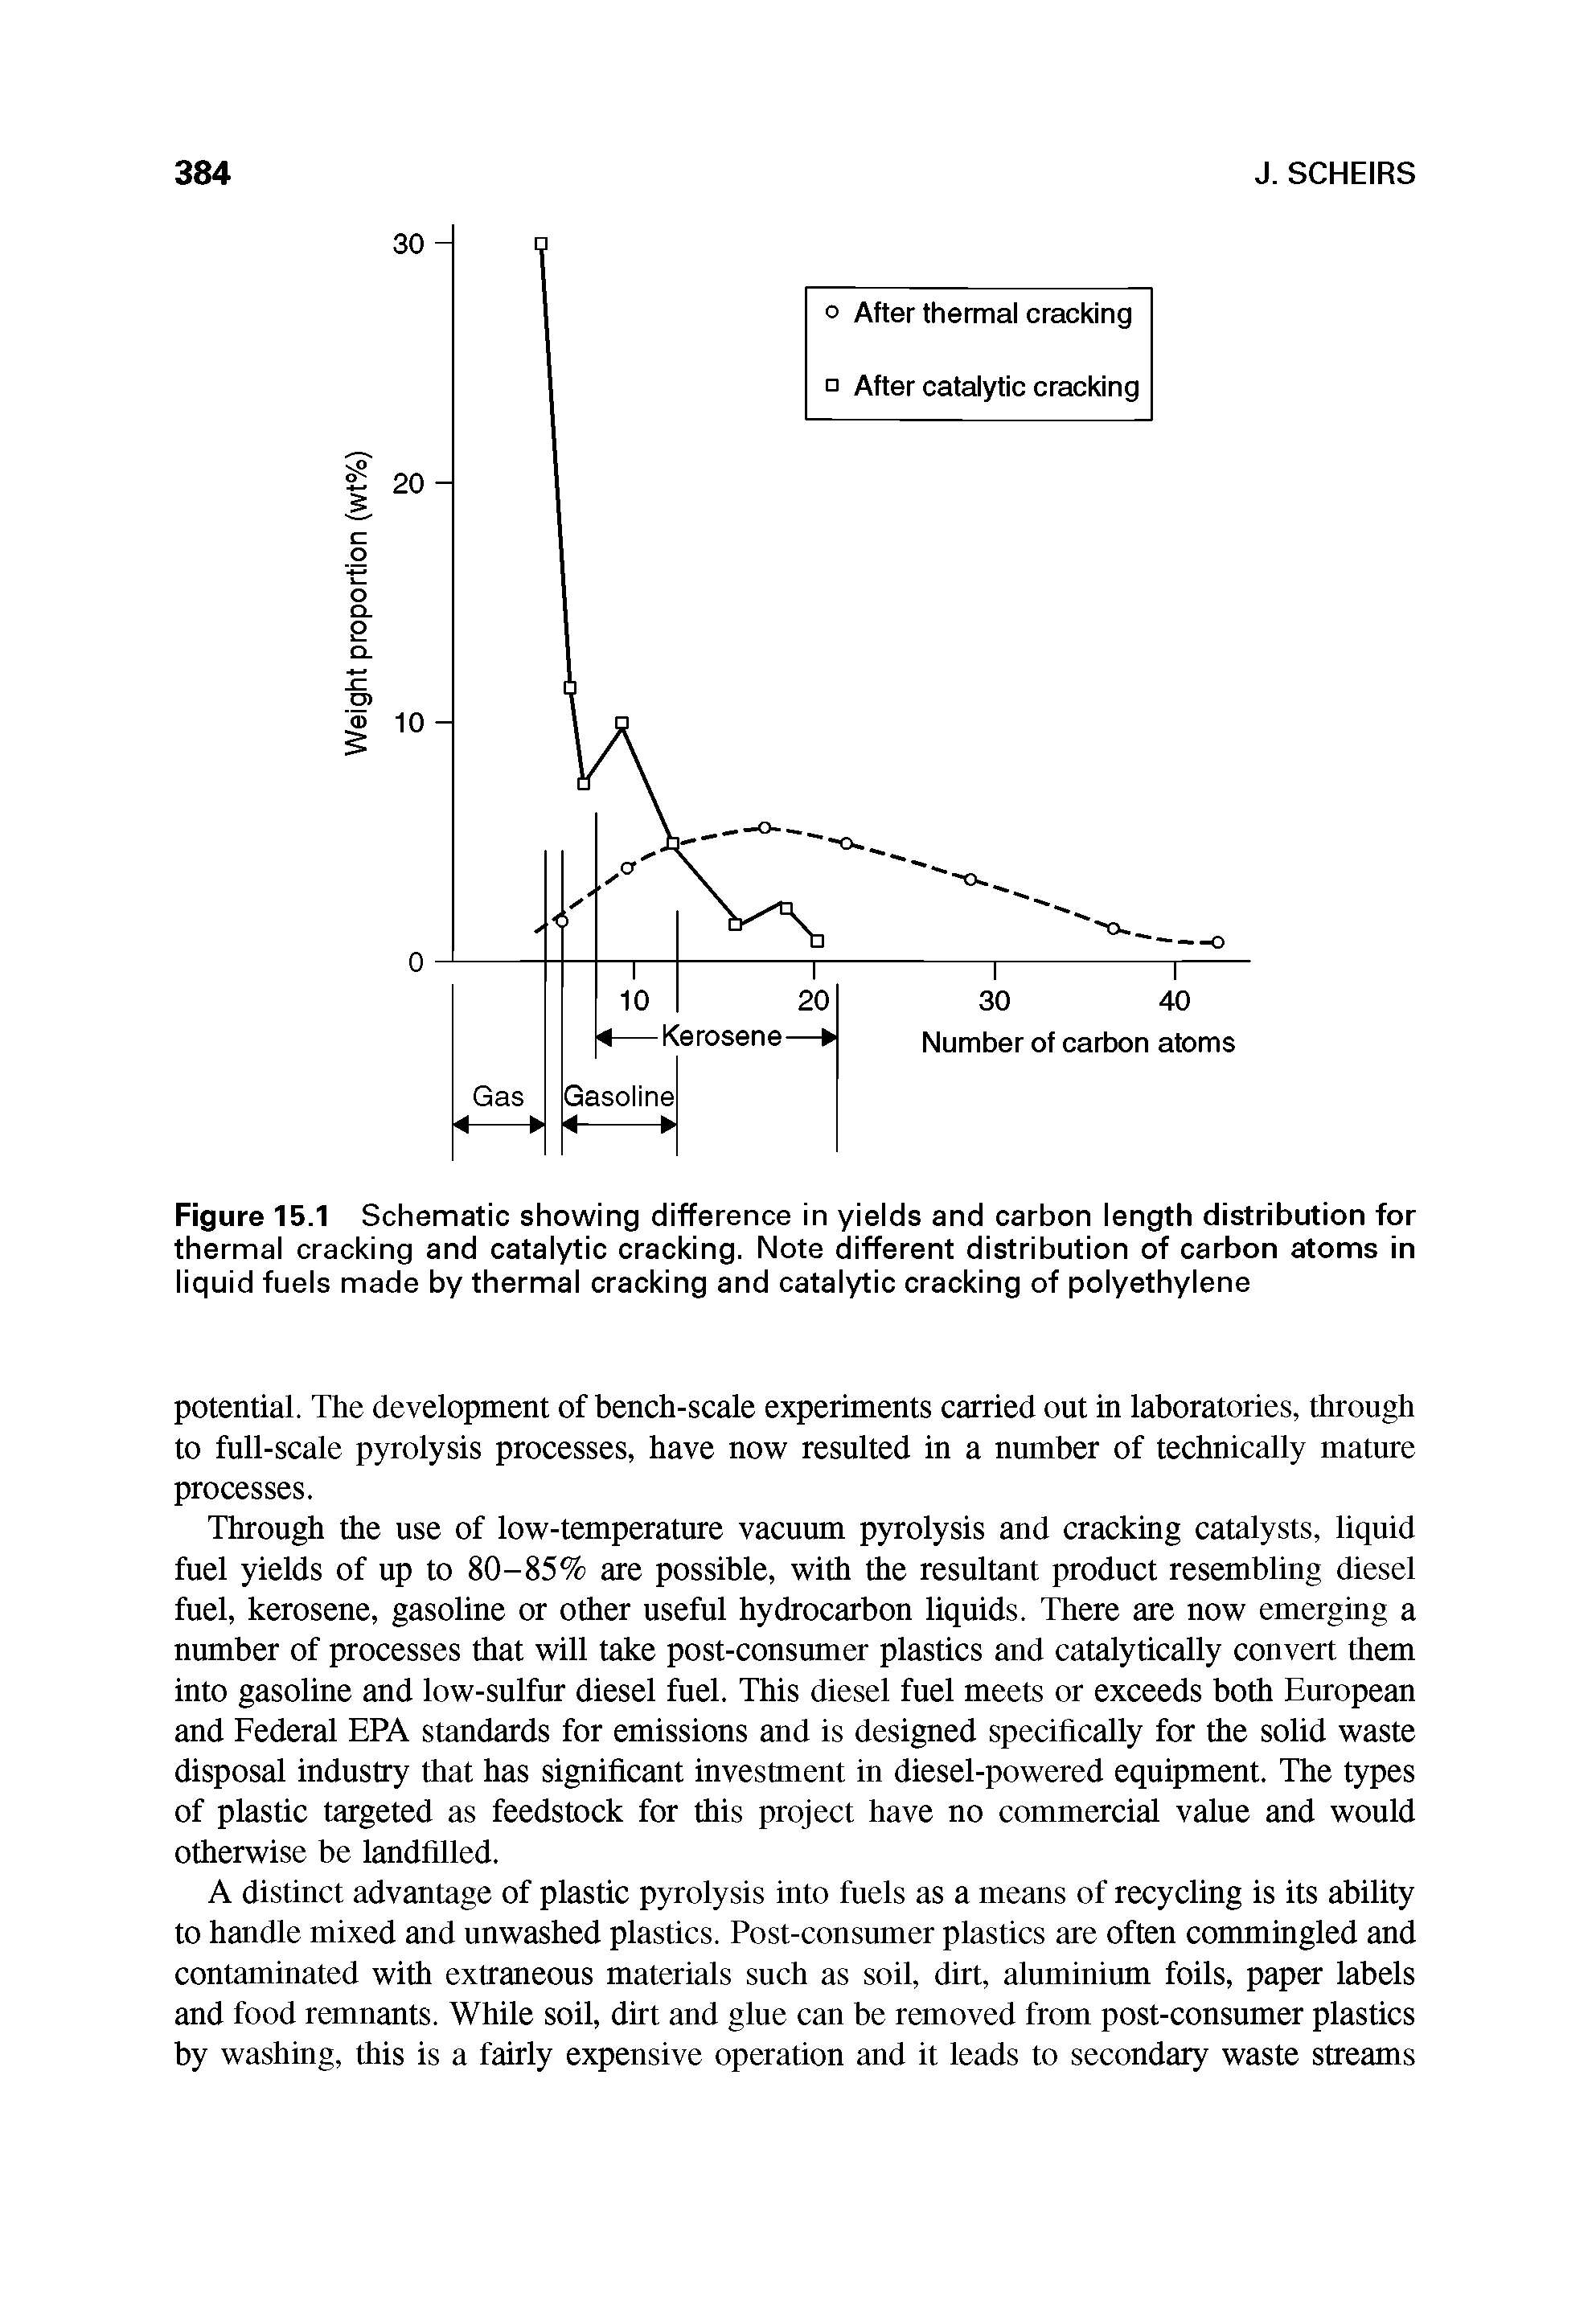 Figure 15.1 Schematic showing difference in yields and carbon length distribution for thermal cracking and catalytic cracking. Note different distribution of carbon atoms in liquid fuels made by thermal cracking and catalytic cracking of polyethylene...